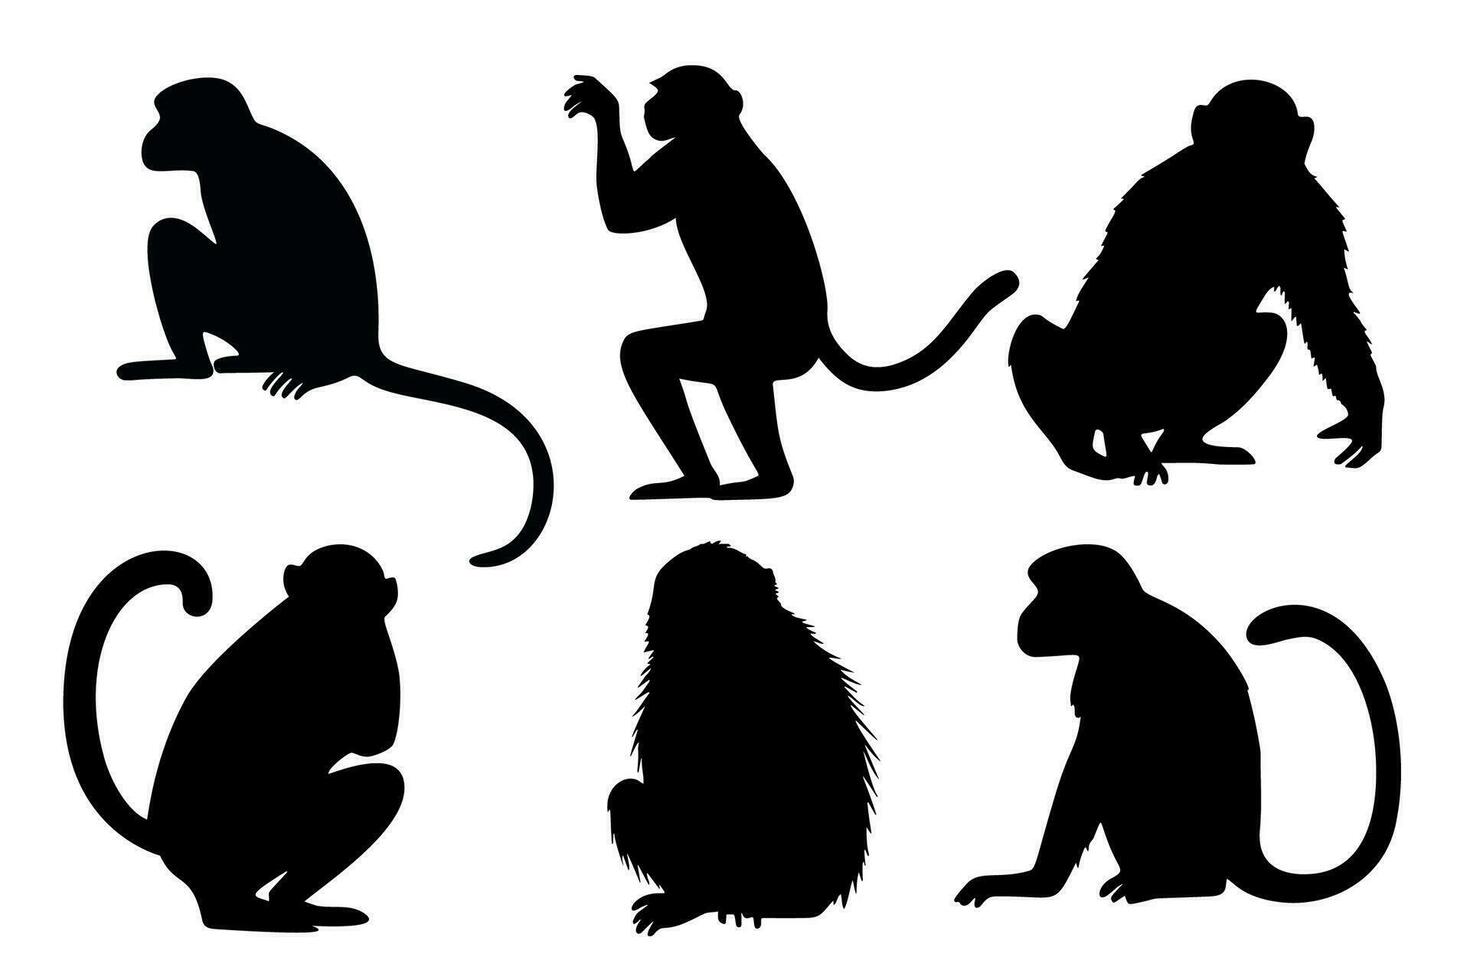 Monkey black silhouettes set. Animals primate in different poses. Vector illustration isolated on white background